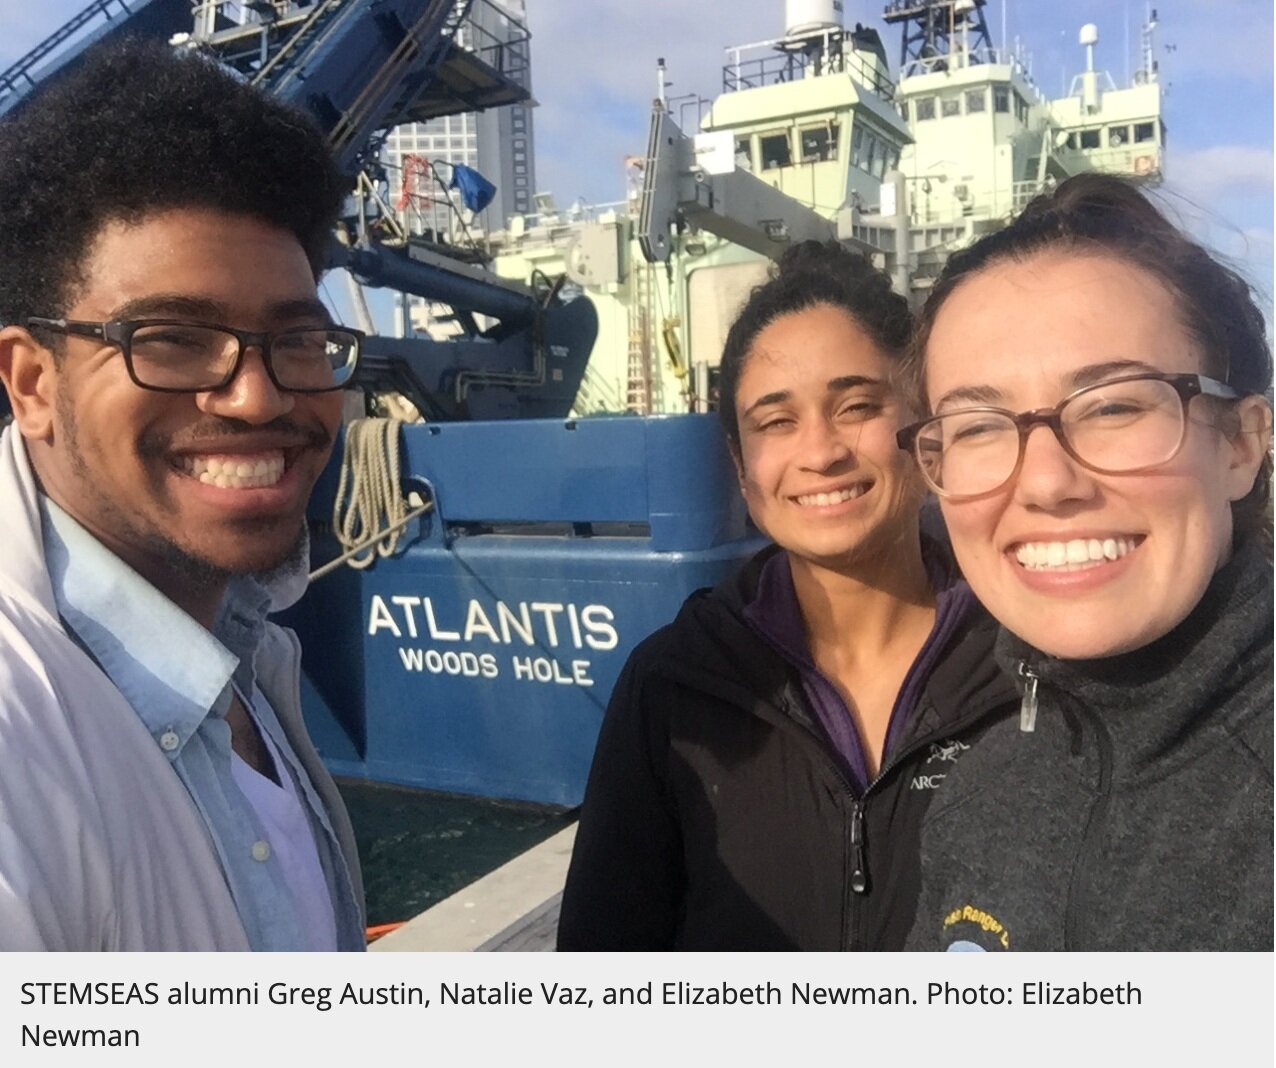 STEAMSEAS, the ships that guarantee diversity in science